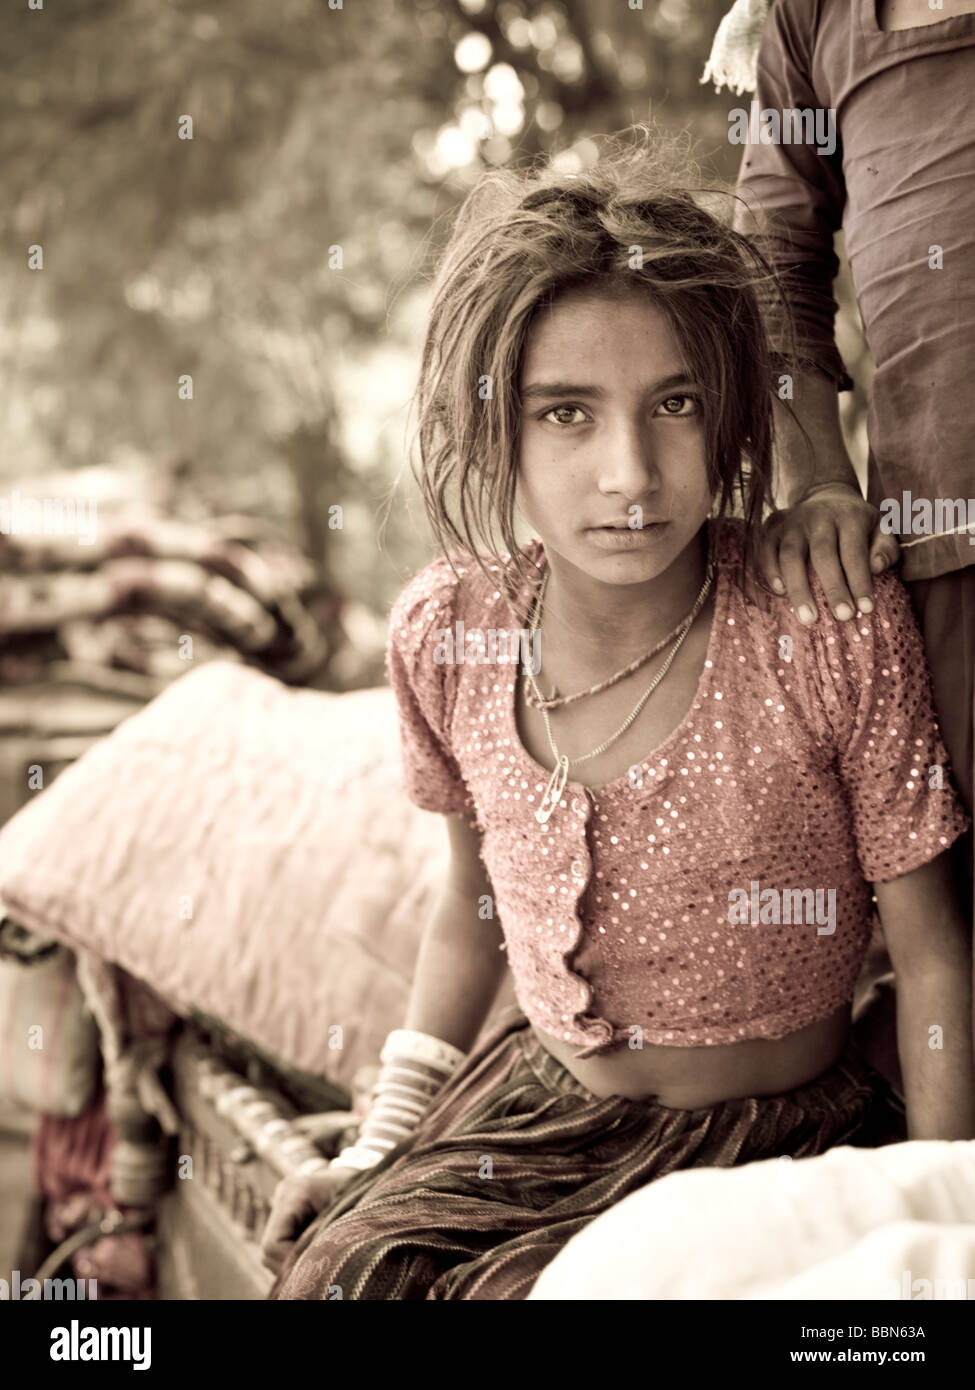 Portrait of young gypsy girl Stock Photo